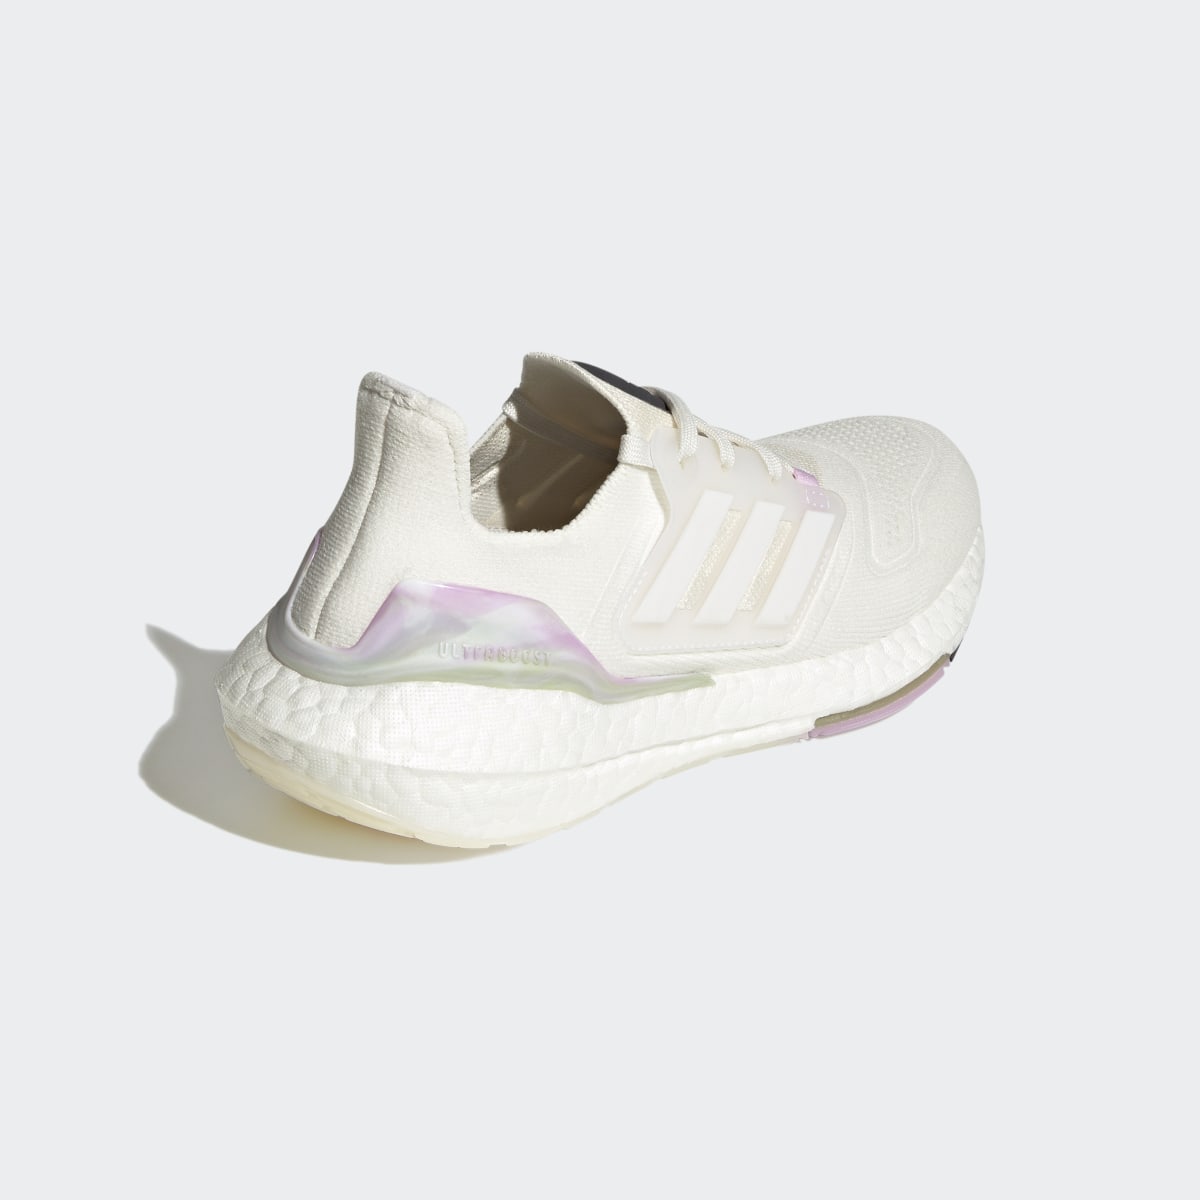 Adidas Scarpe Ultraboost 22 Made With Nature. 9